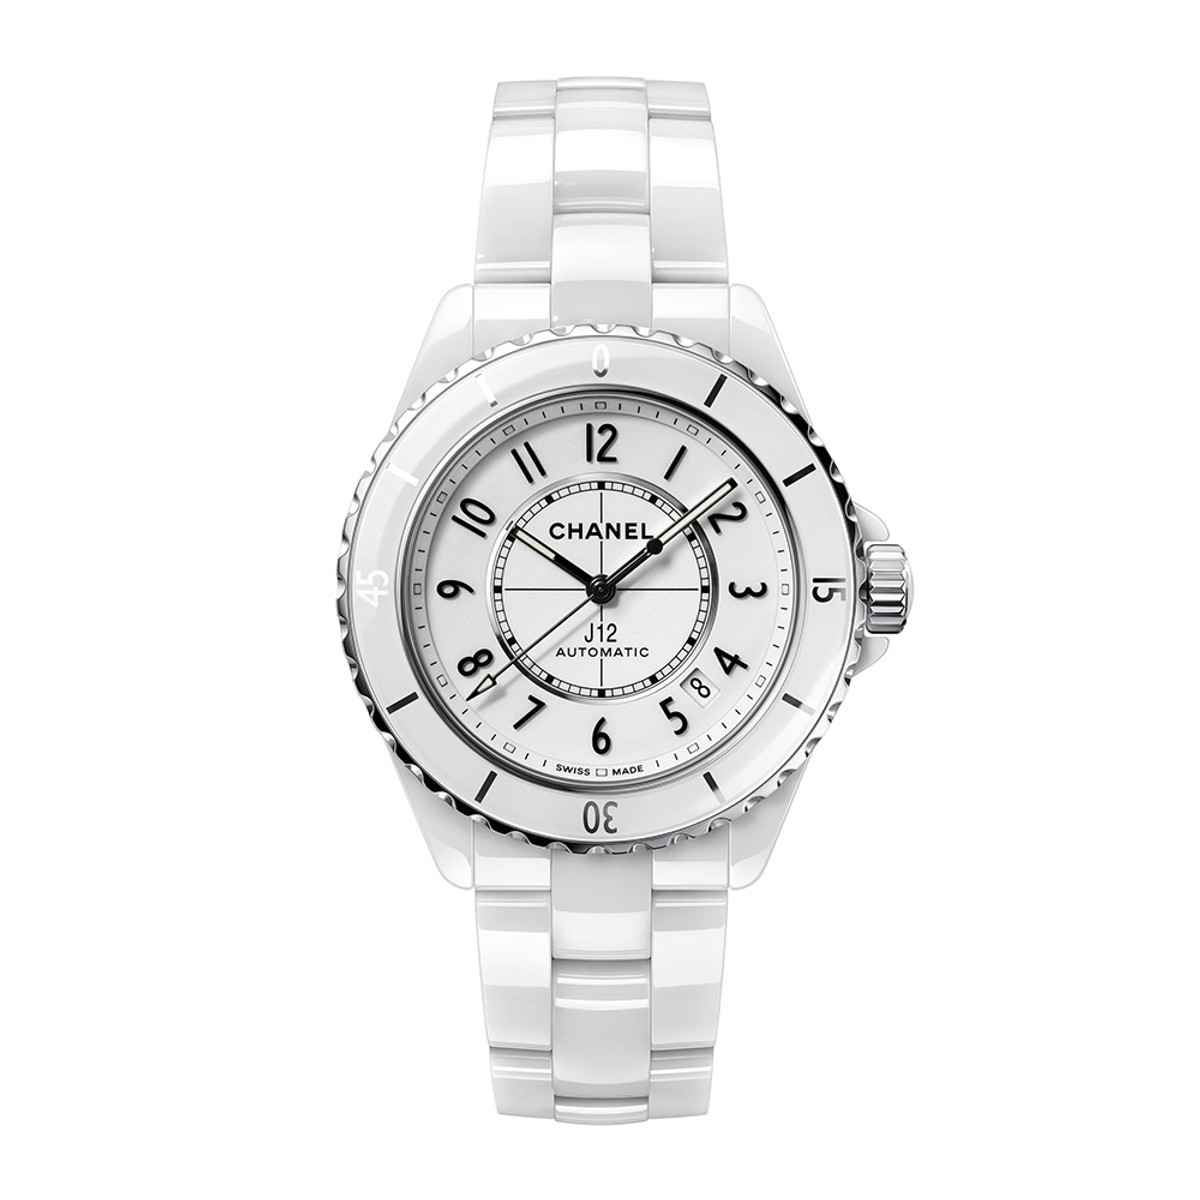 CHANEL J12 WATCH CALIBER 12.1, 38 MM-WCHNL0223 Product Image